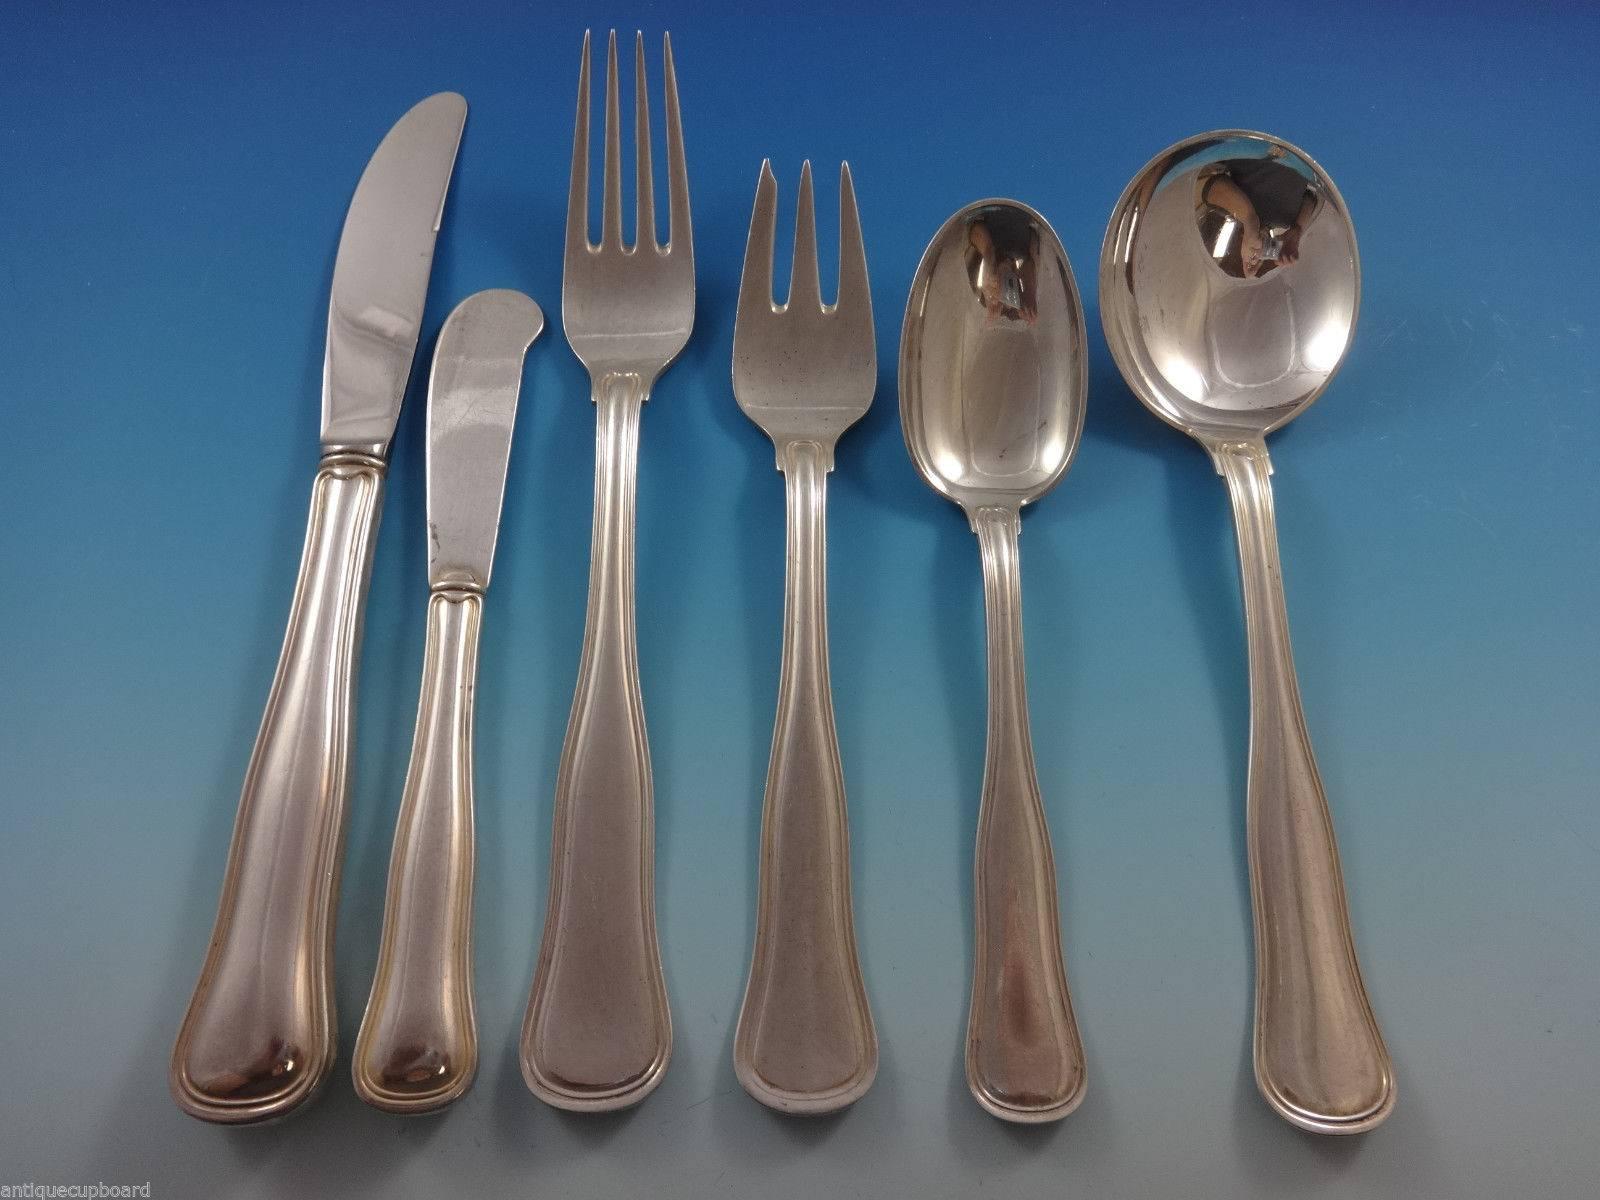 Old Danish by Cohr Danish sterling silver flatware set of 48 pieces. This pattern has a clean and simple Danish modern design! This set includes:

Eight knives, 7 7/8